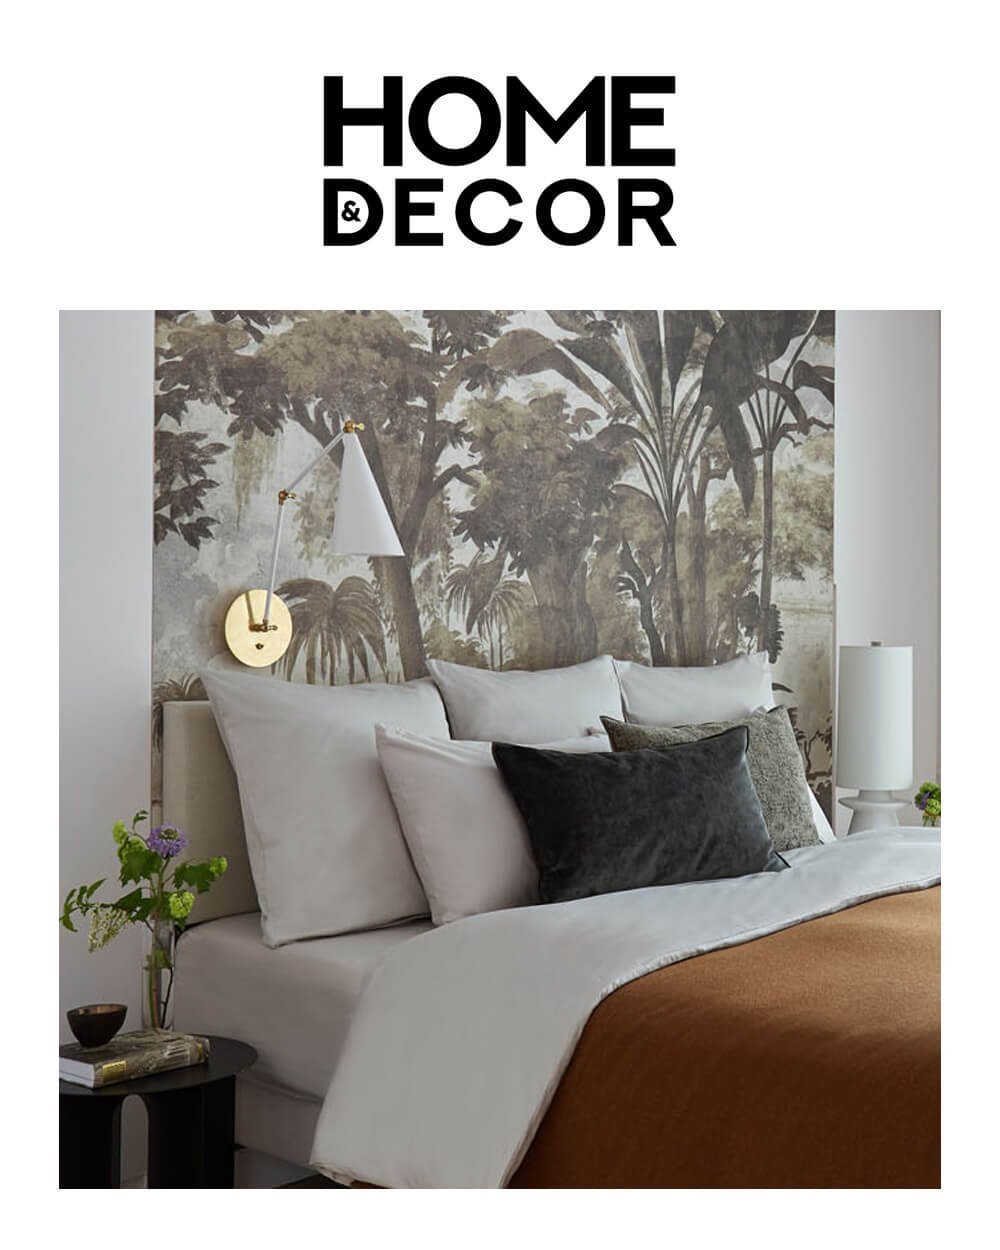 Giving Your Bedroom a New Look